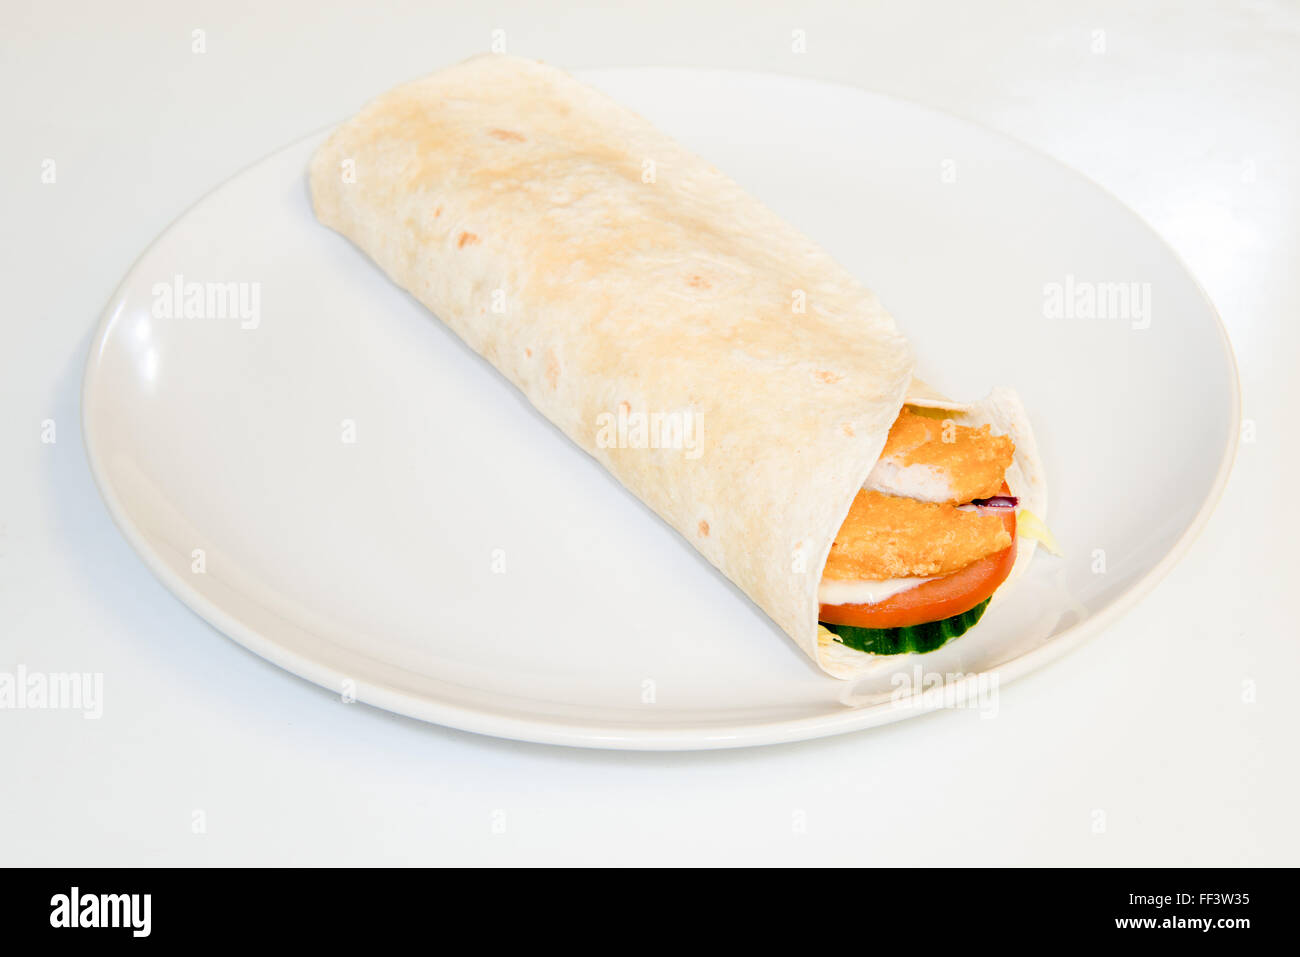 Crispy chicken and salad in a tortilla wrap on a plate Stock Photo